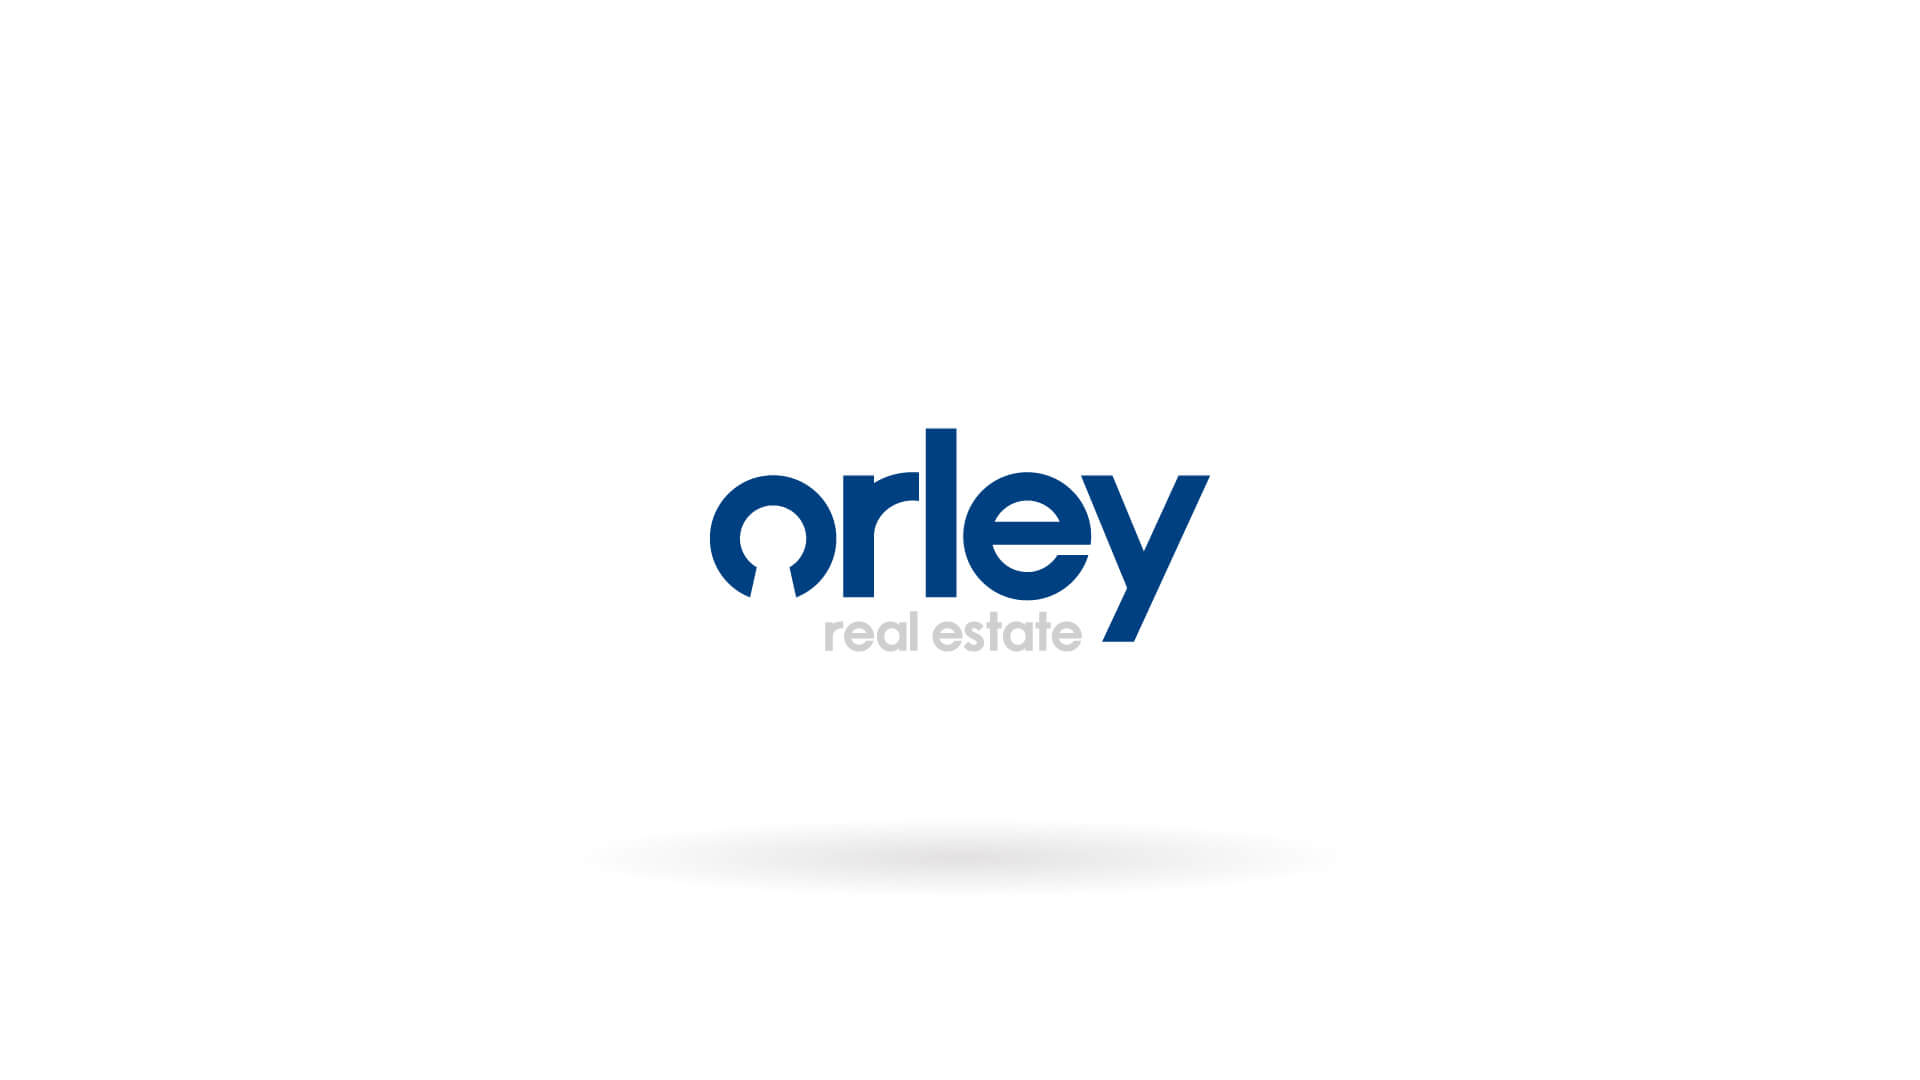 Orley Real Estate Brand